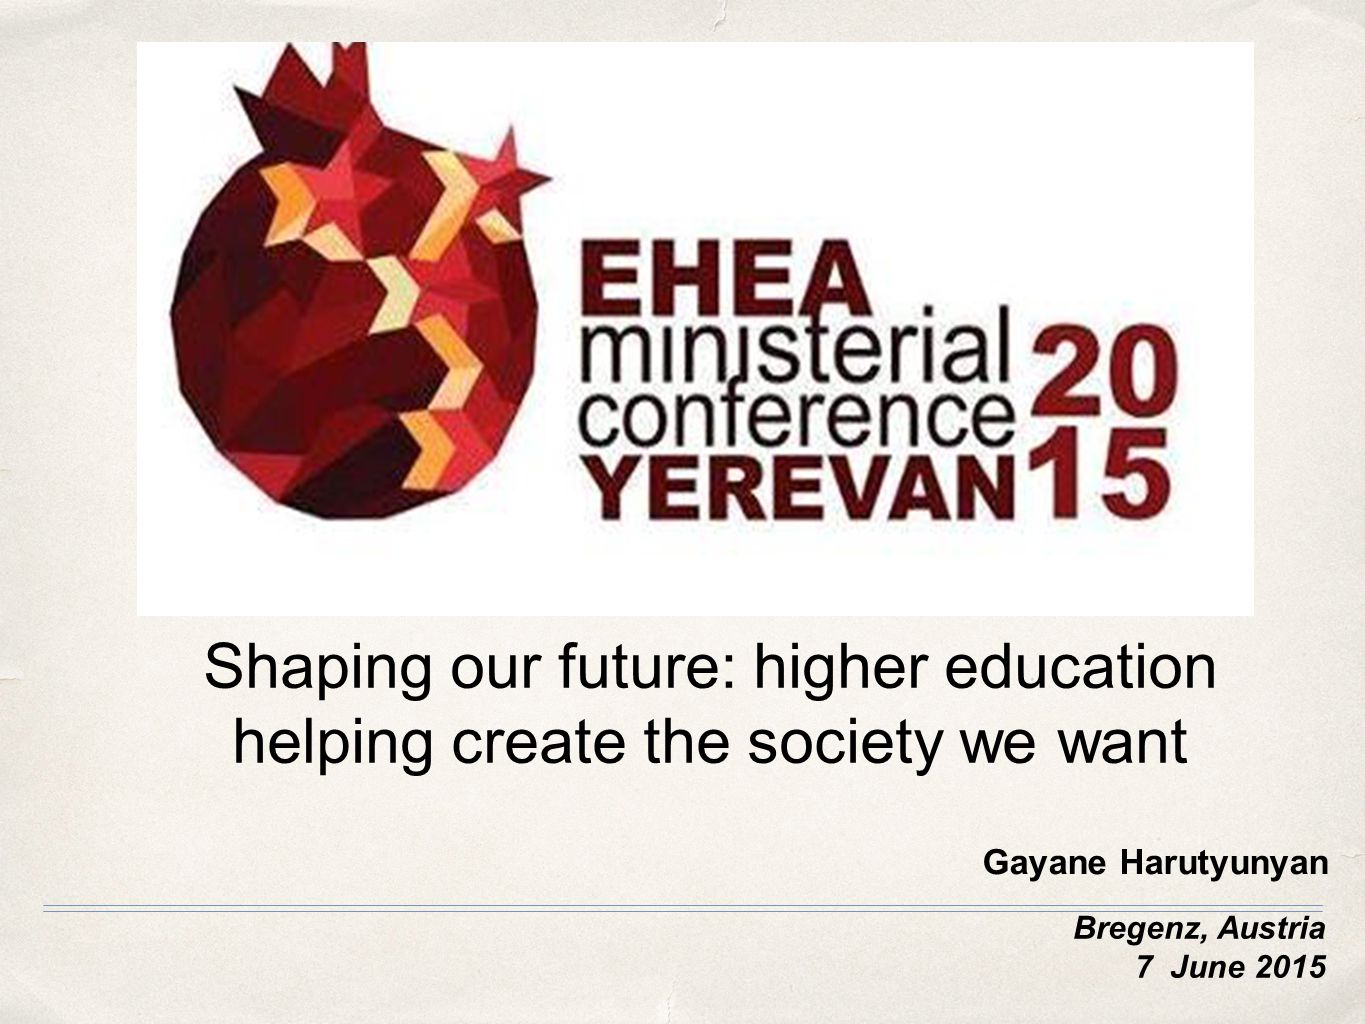 Bregenz, Austria 7 June 2015 Shaping our future: higher education helping create the society we want Gayane Harutyunyan